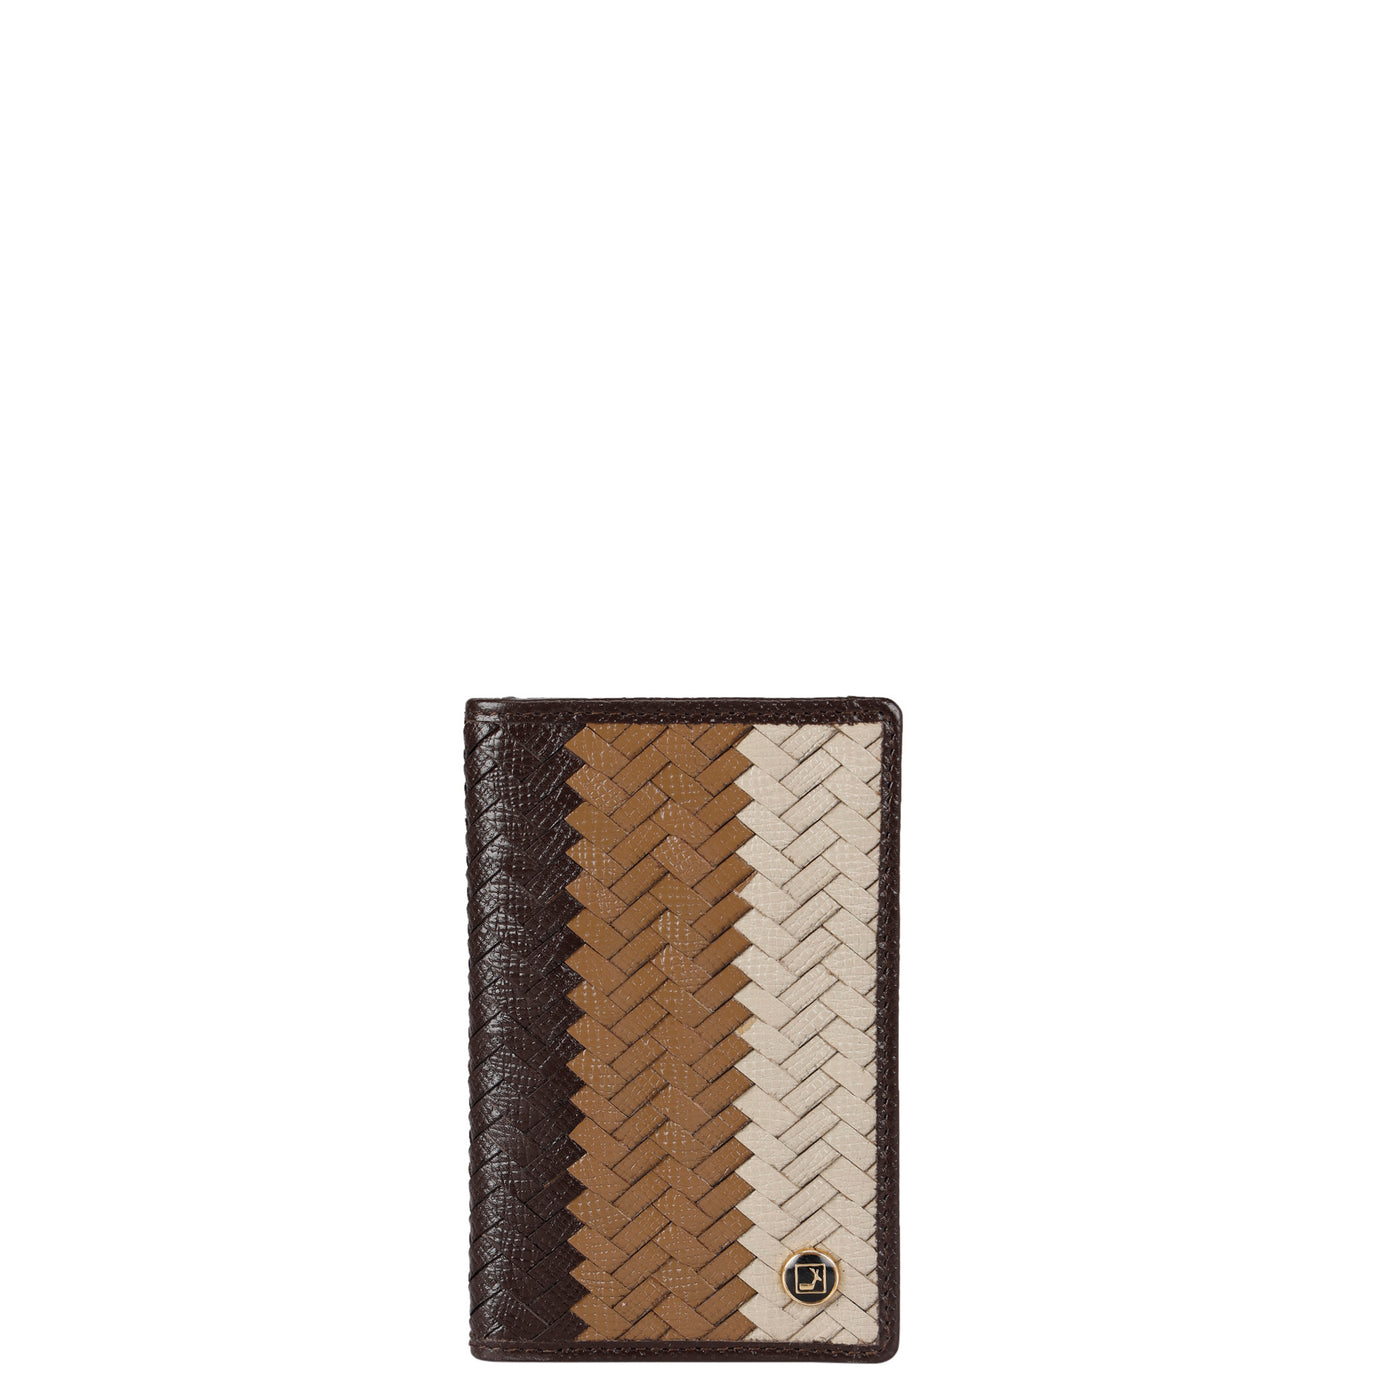 Mat Franzy Leather Card Case - Chocolate